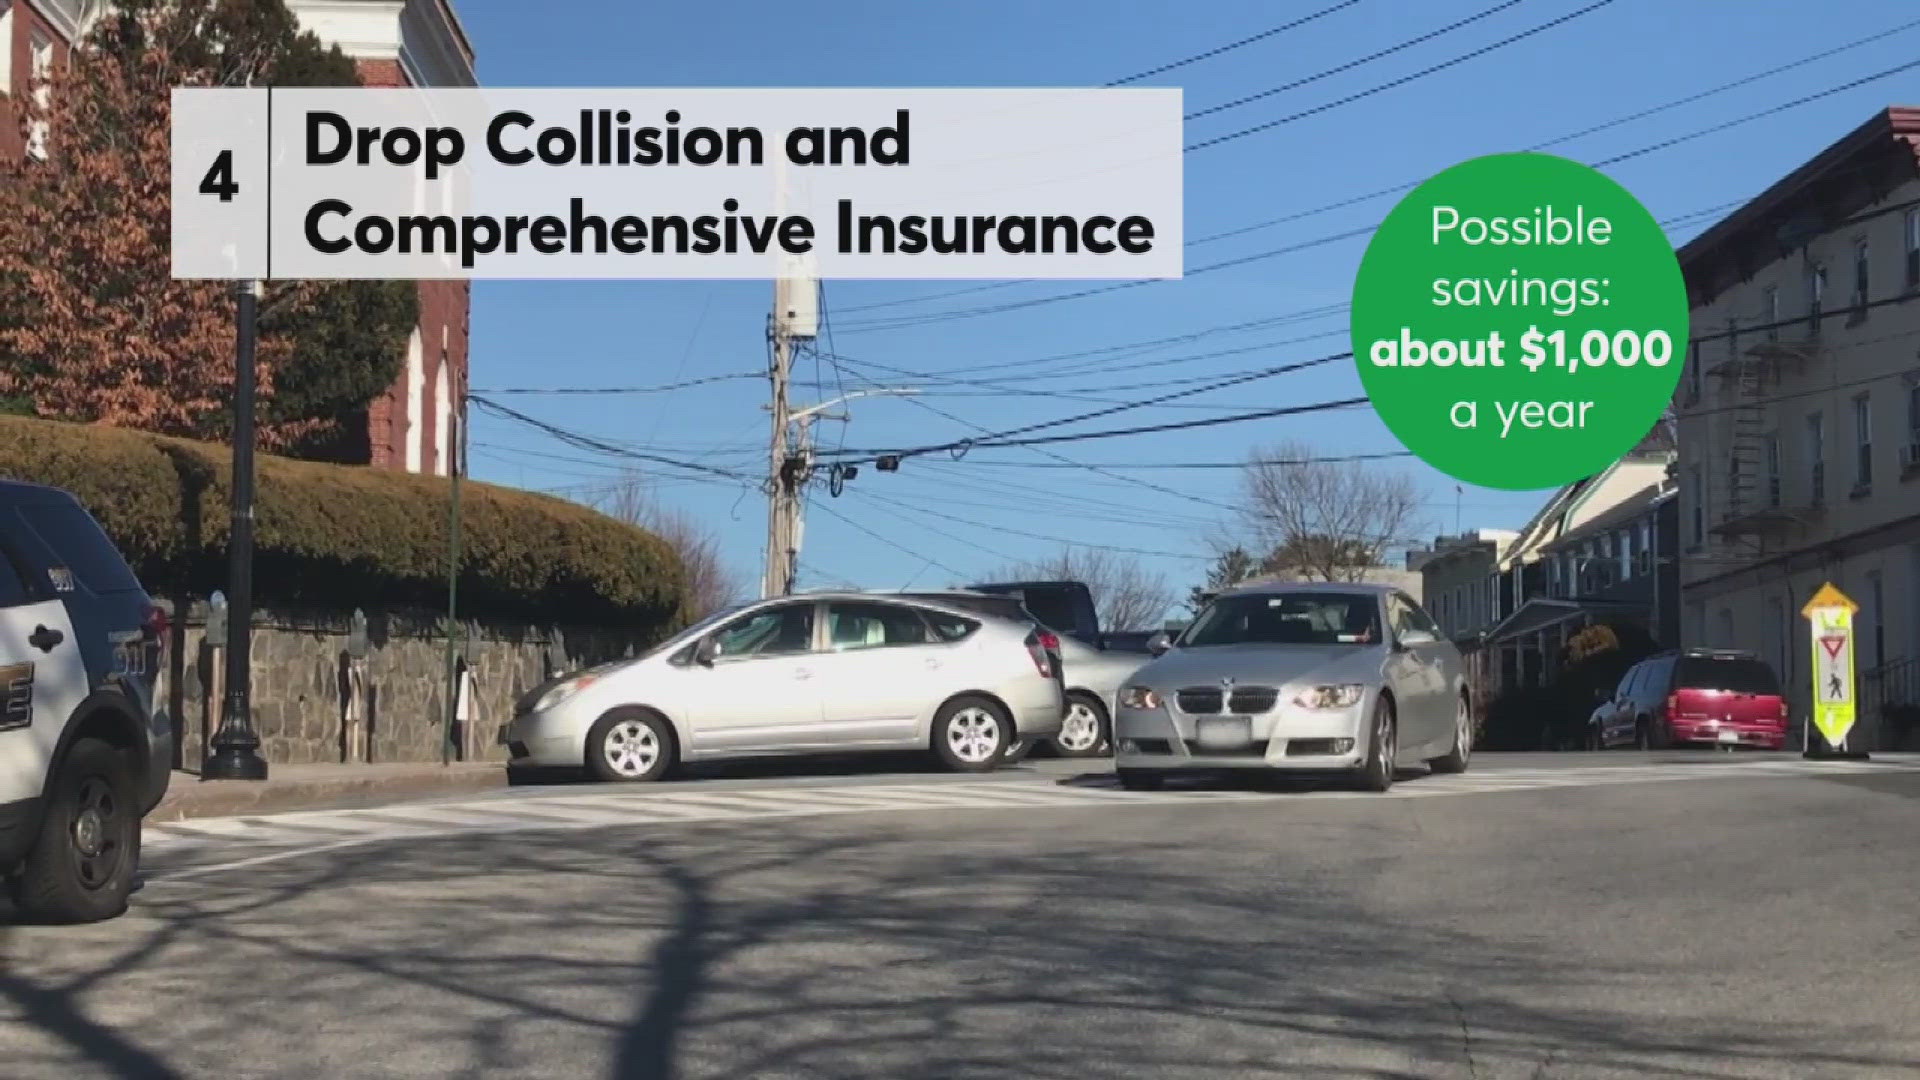 Steve Staeger shares some tips from our partners at Consumer Reports on how to lower your car insurance premiums.